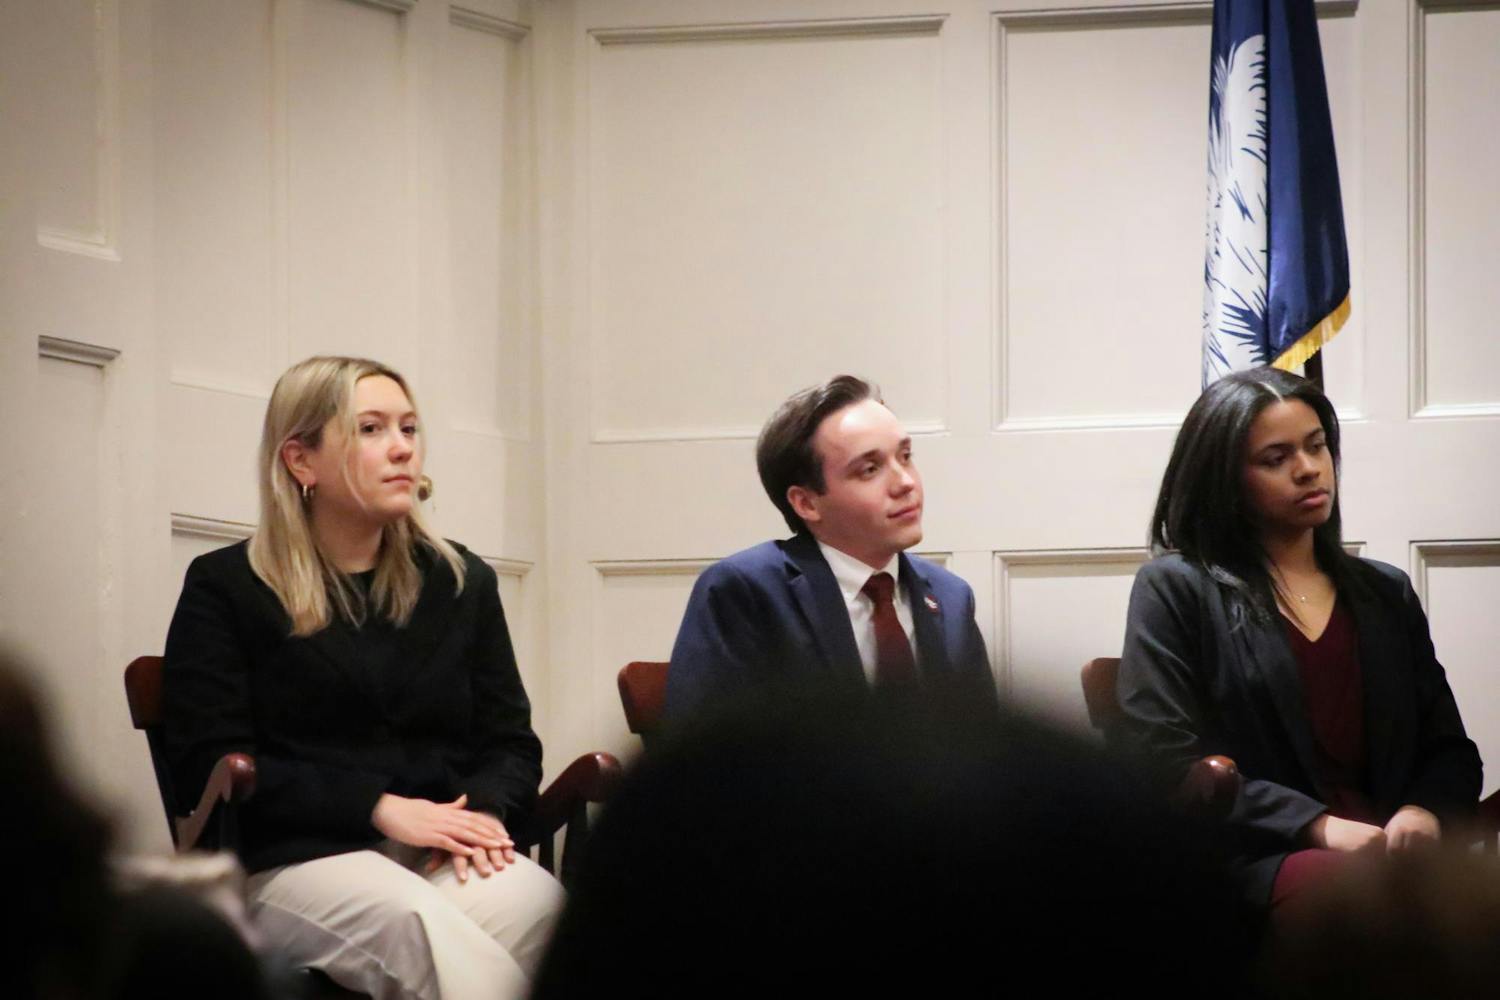 Hannah Augsbach Lamma (left), Cameron Eubanks (middle) and Abrianna Reaves (right) sit at the front of Rutledge Chapel, listening to Student Body President Emmie Thompson give her State of the Student Body address on Feb. 1, 2023. The State of the Student Body took place in Rutledge Chapel on the Horseshoe at the University of South Carolina.